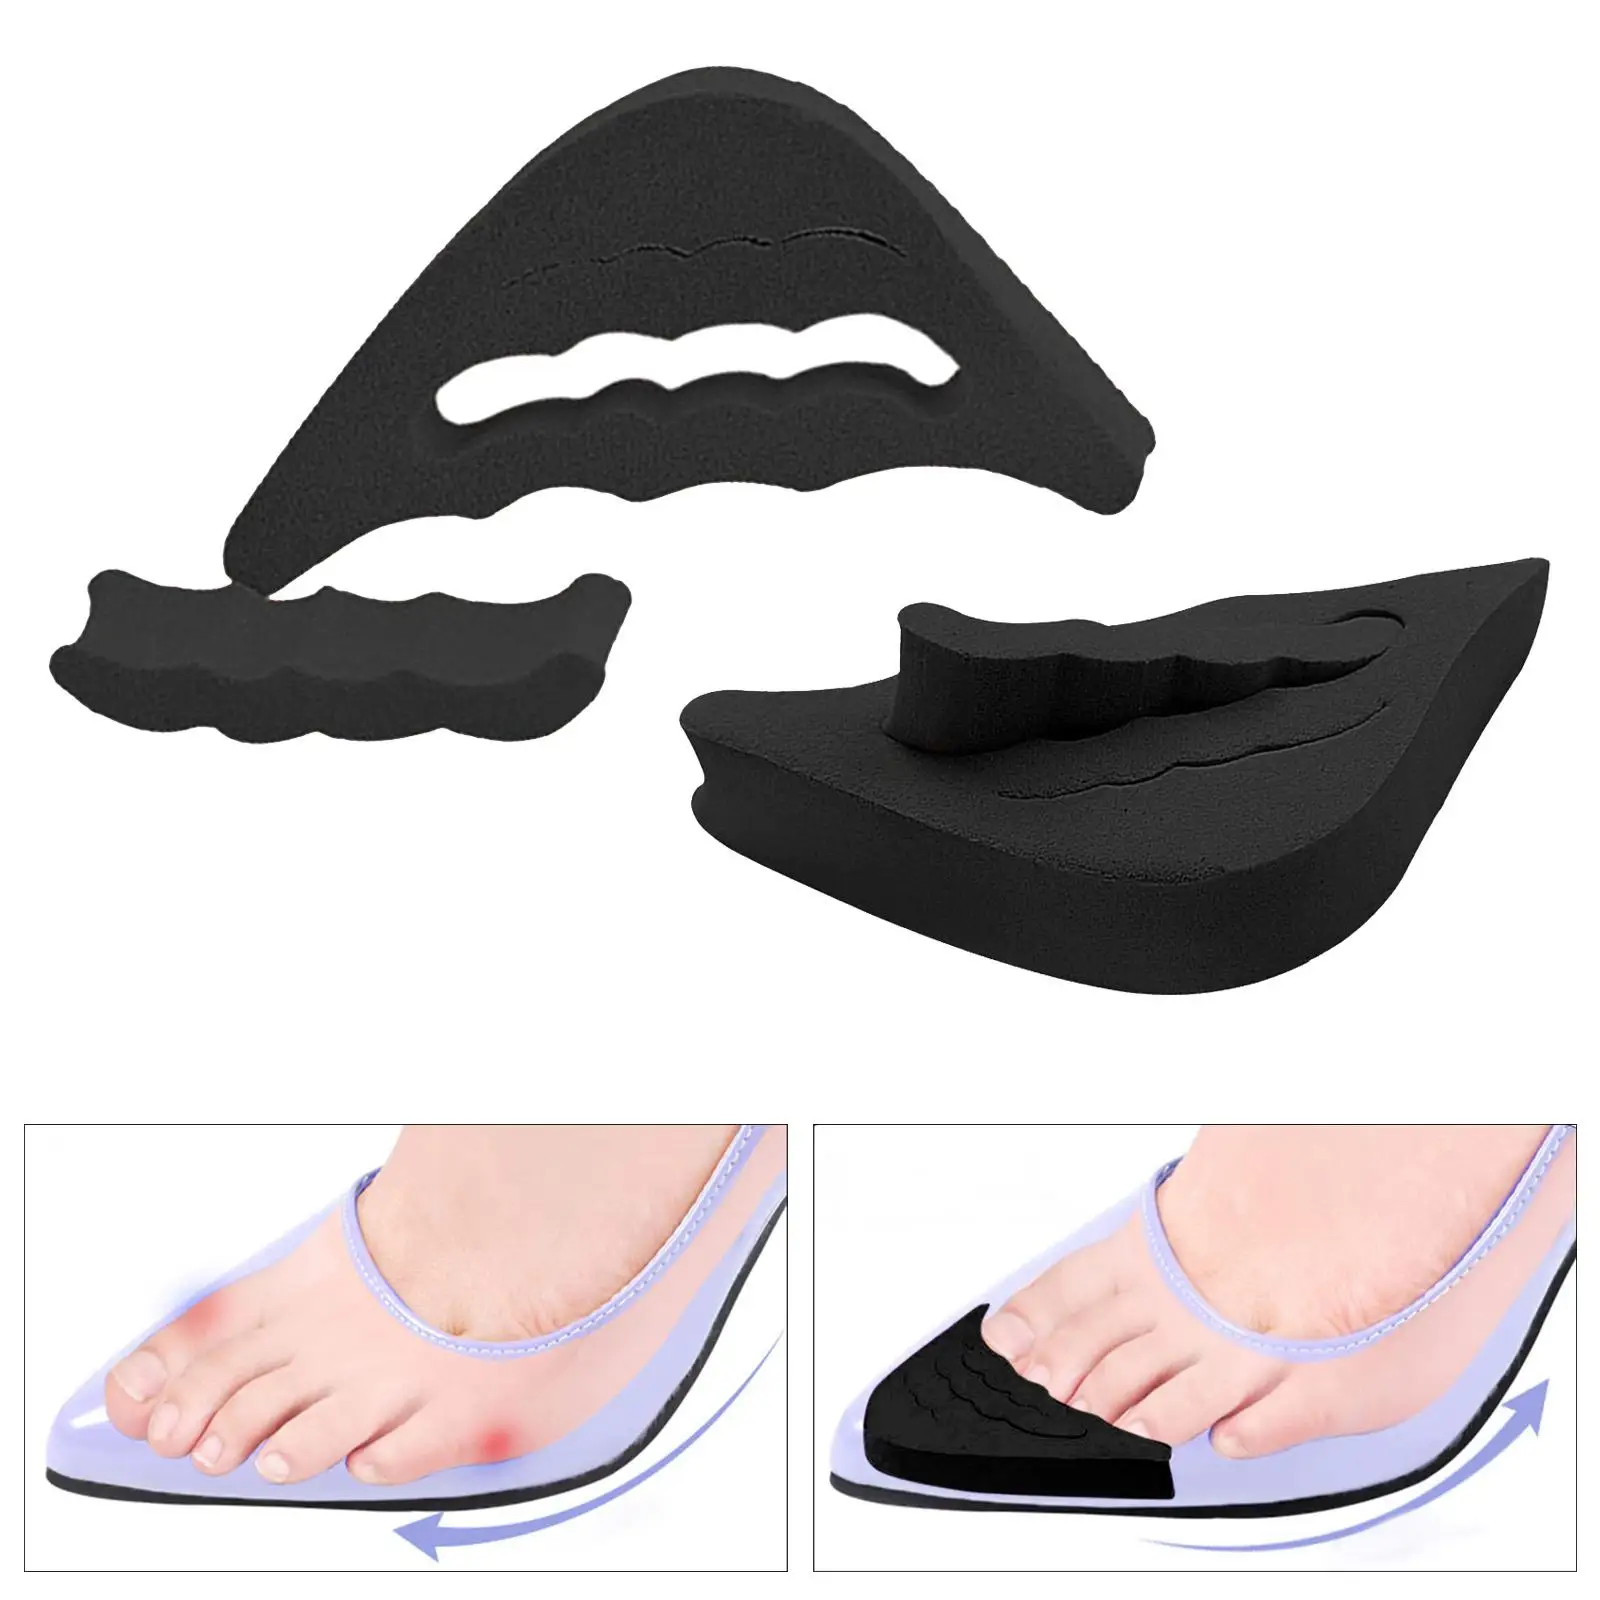 Toe Filler Inserts Pad Reusable Shoe Fille Feet Protector Toe Plug Toes Forefoot Pads for Running Sports Fishing Riding Flats